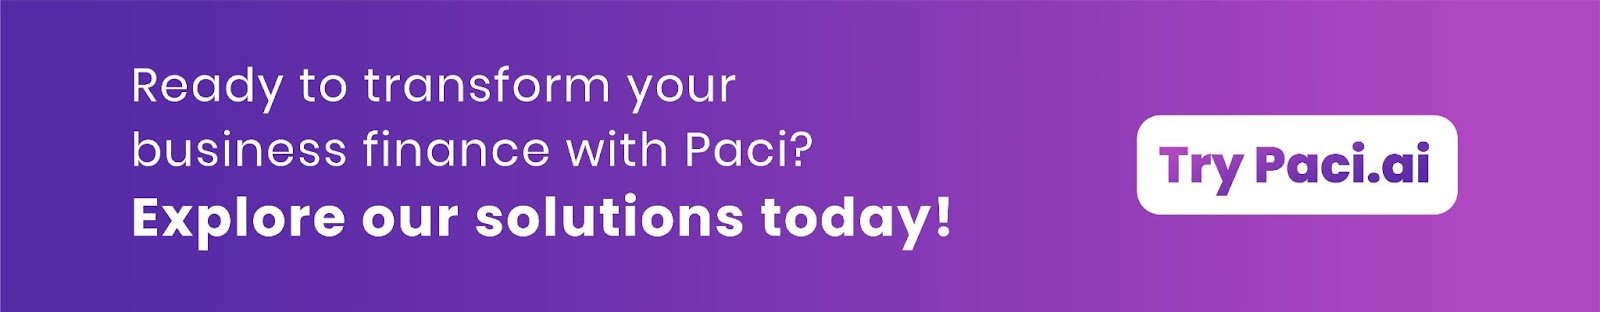 Explore Paci's Finance Solutions and Transform Your Business Today